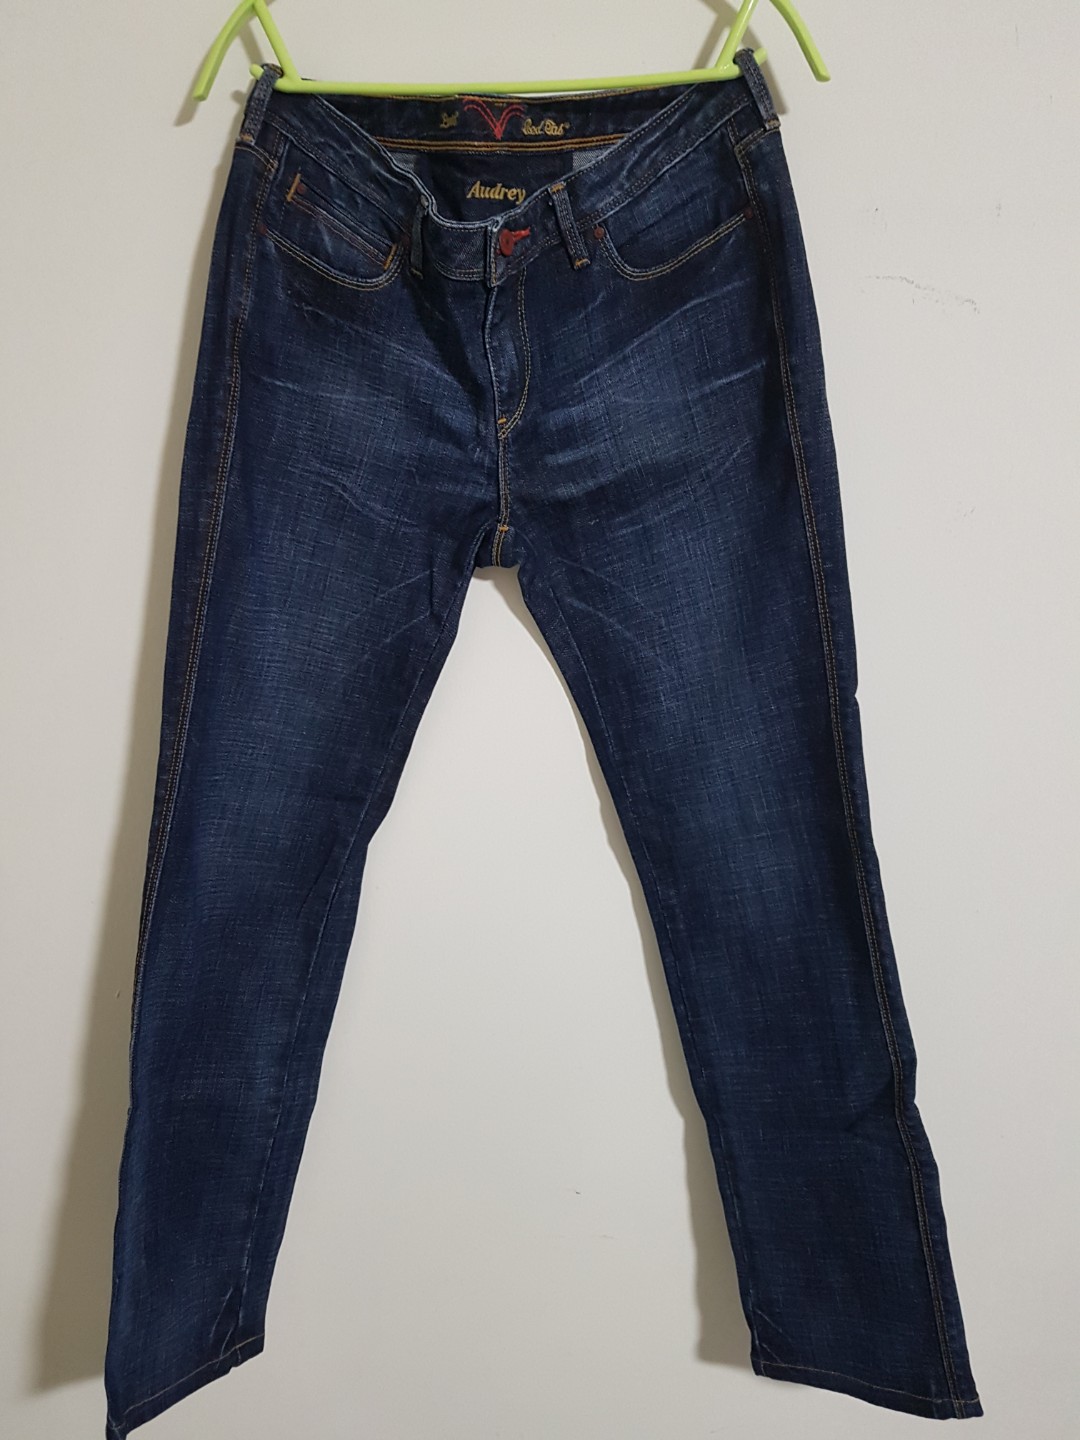 levi's red tab women's jeans